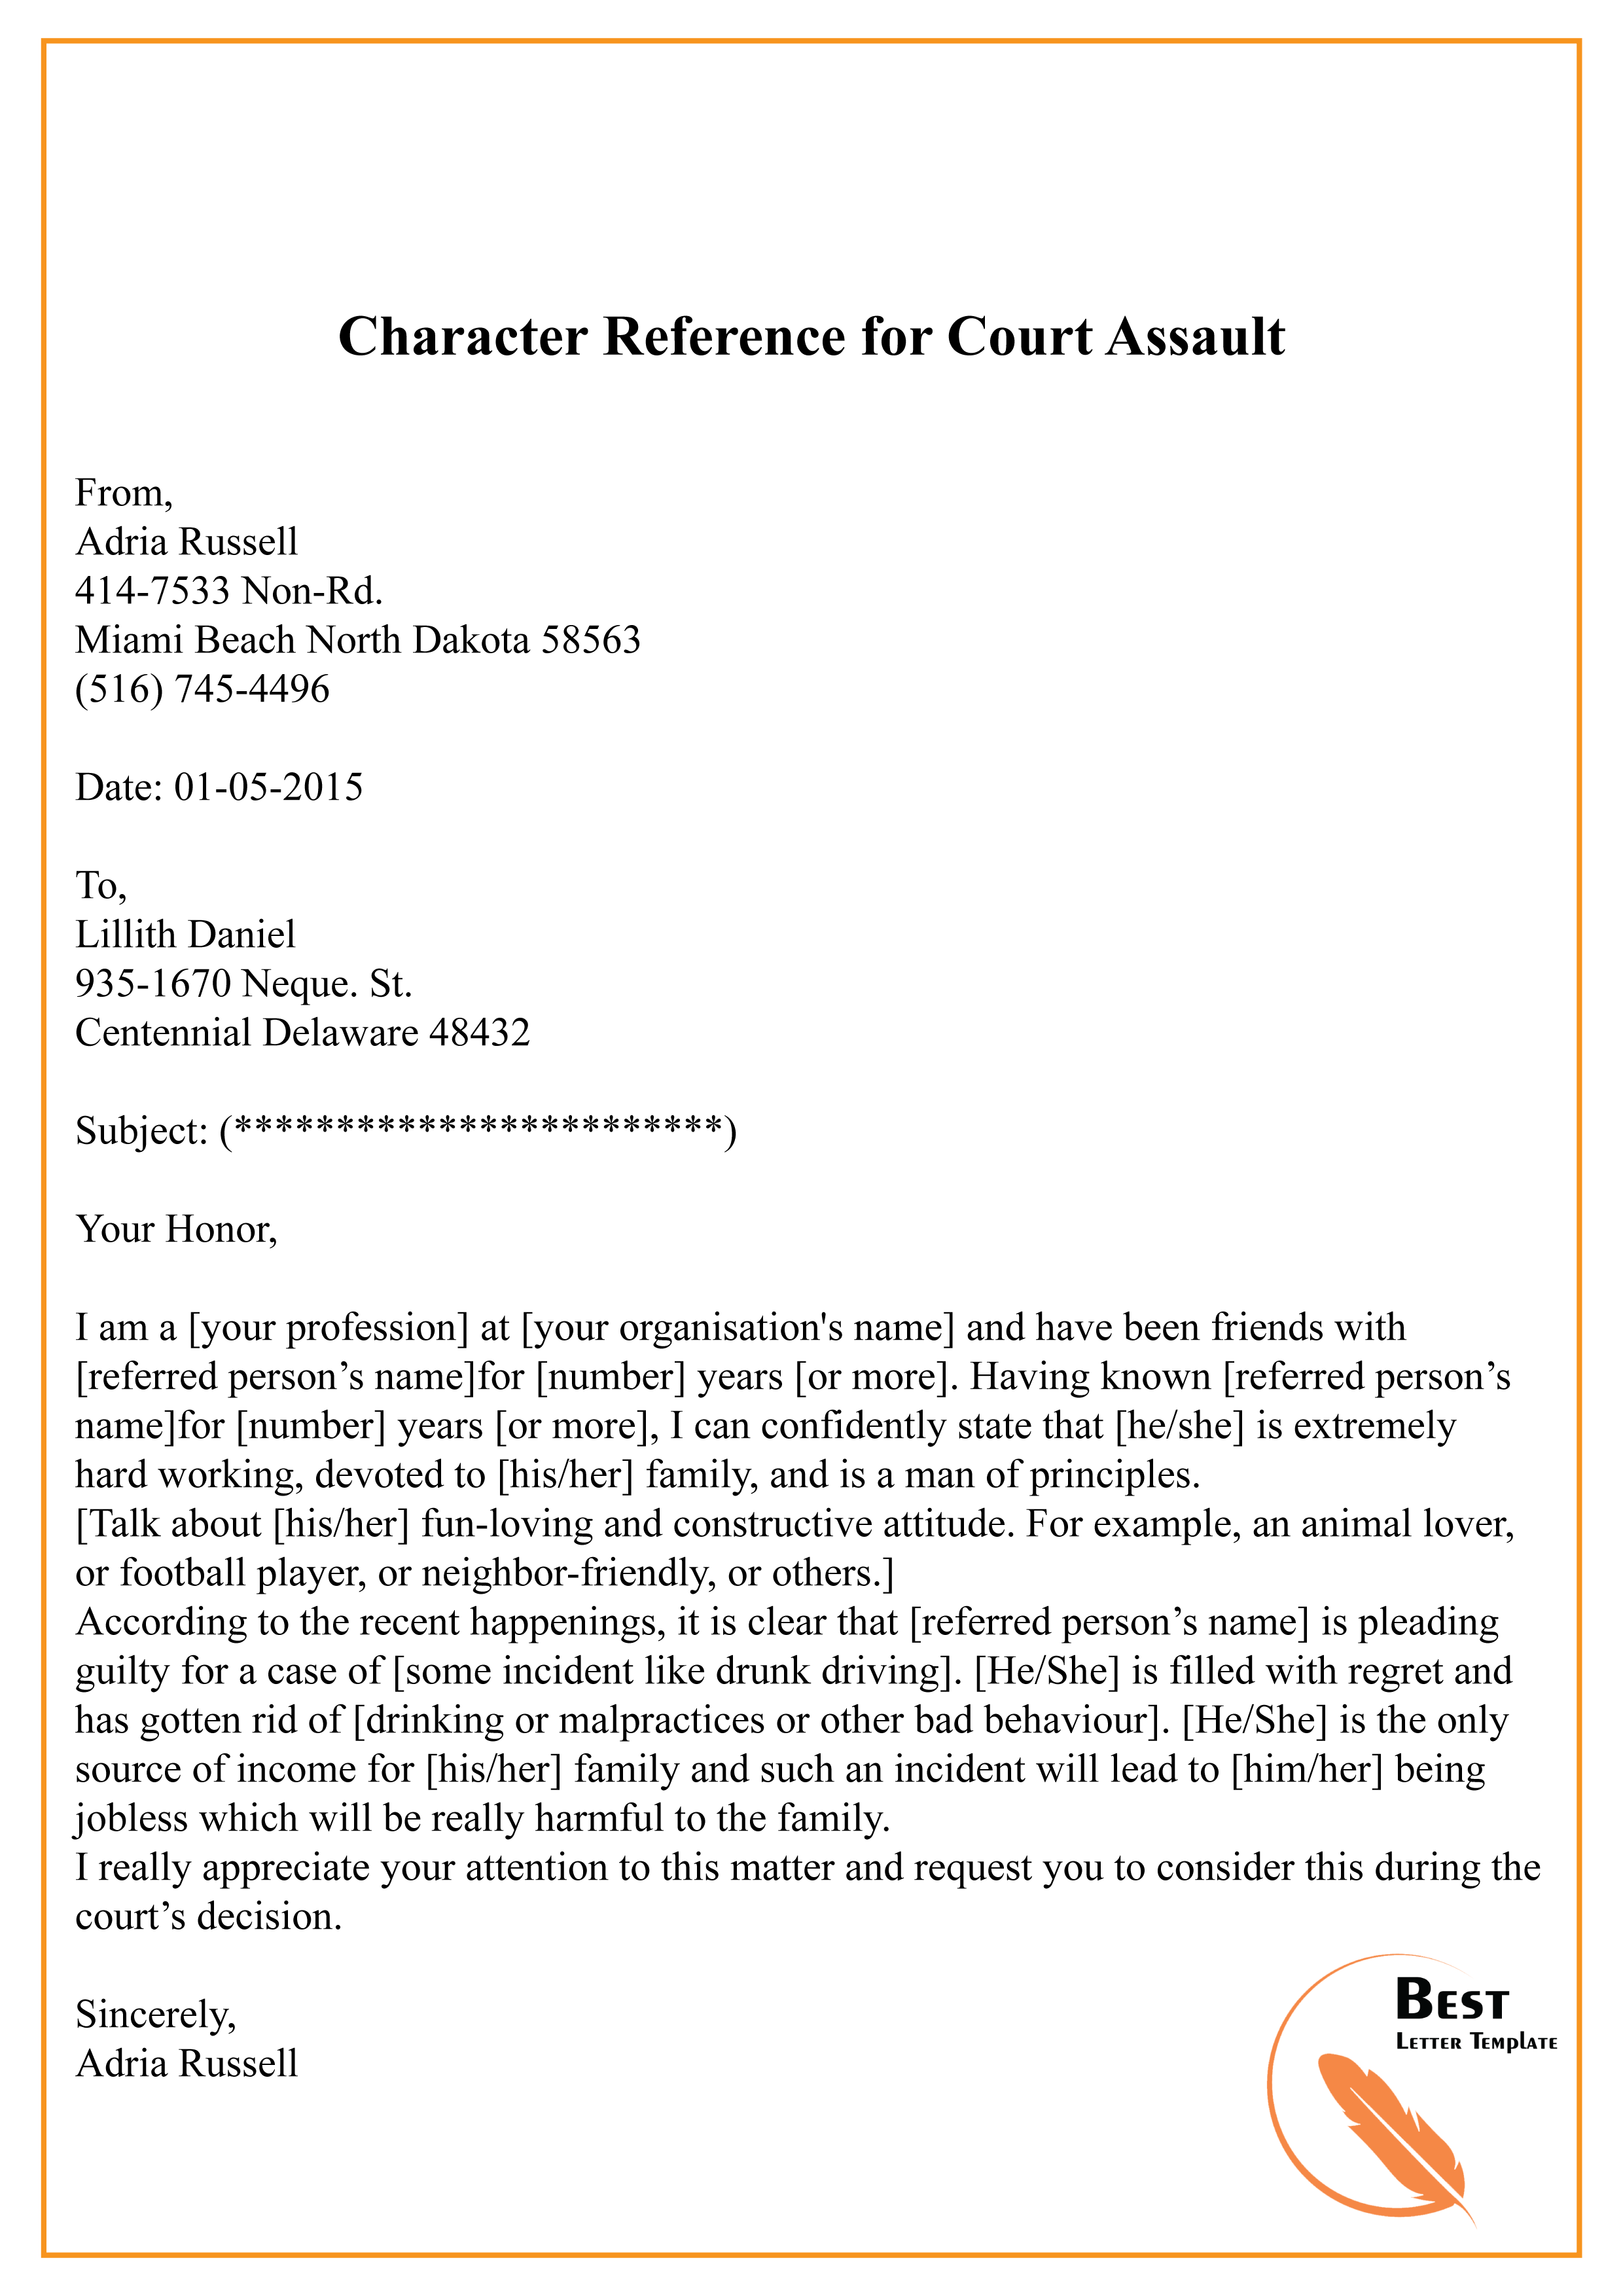 character-reference-for-court-assault-01-best-letter-template